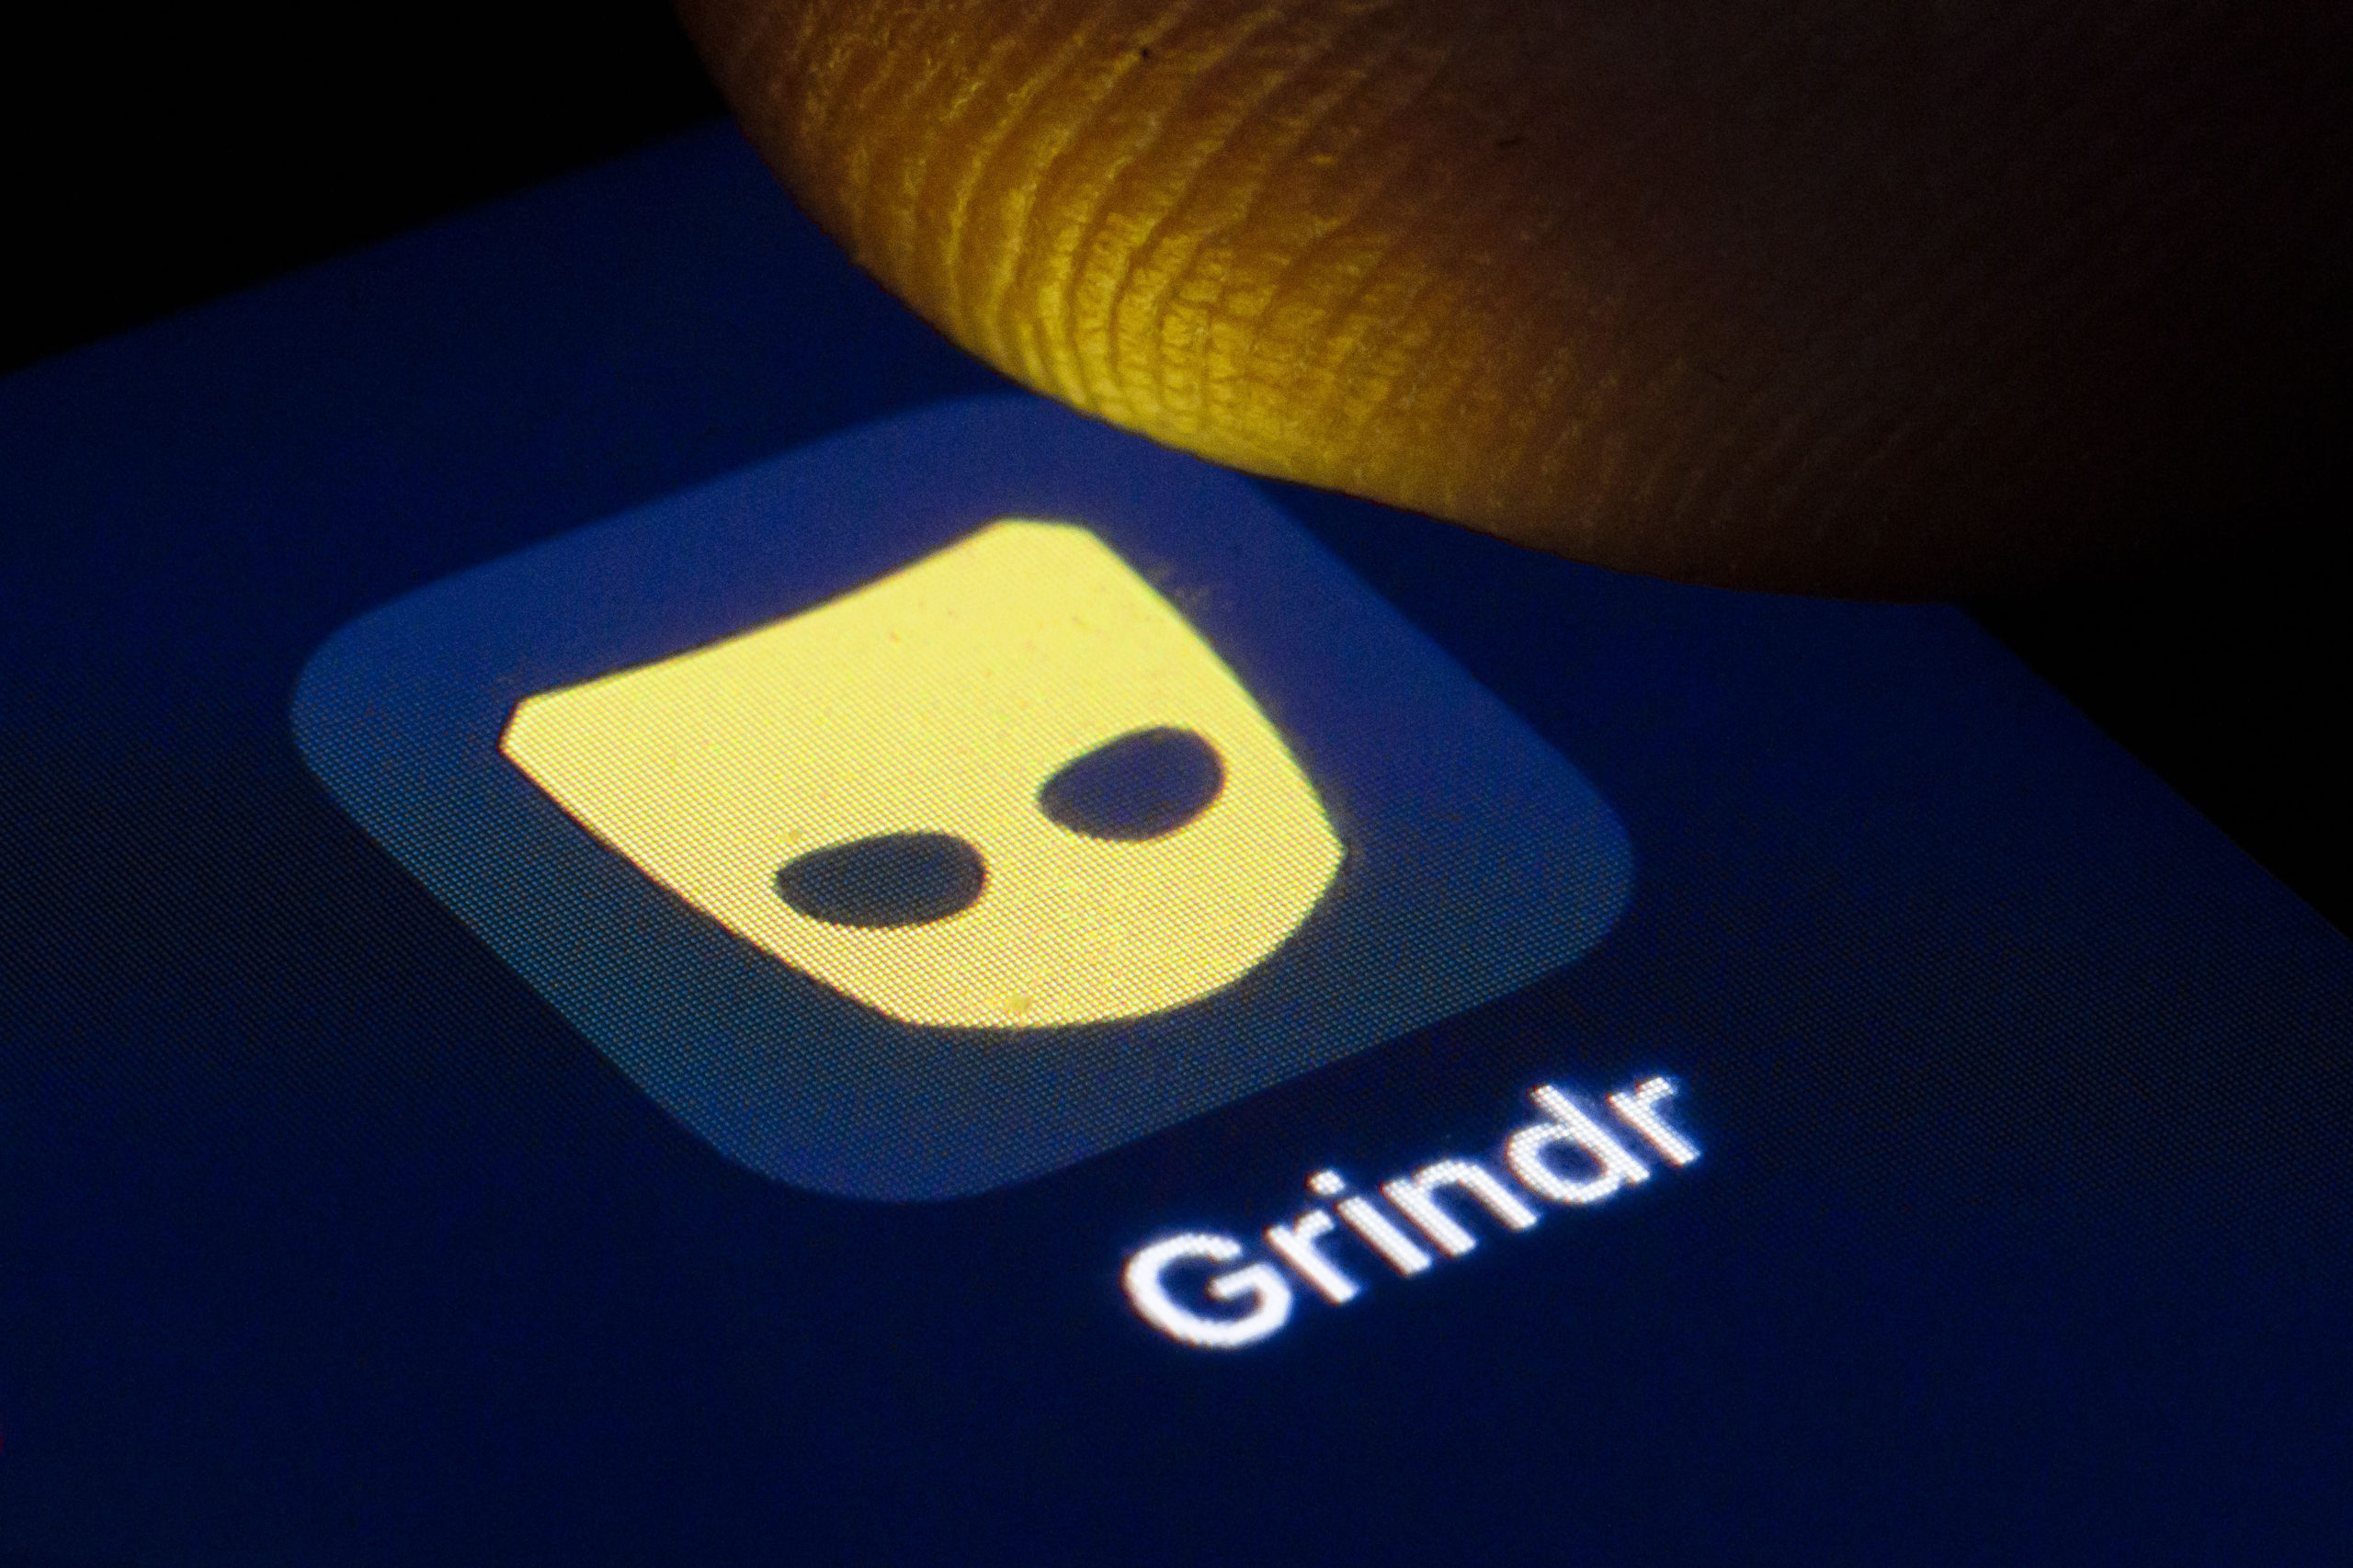 Grindr Flaw Allowed Hijacking Accounts With Just An Email Address Wilson S Media - new roblox flip v2 exploit patched deimos